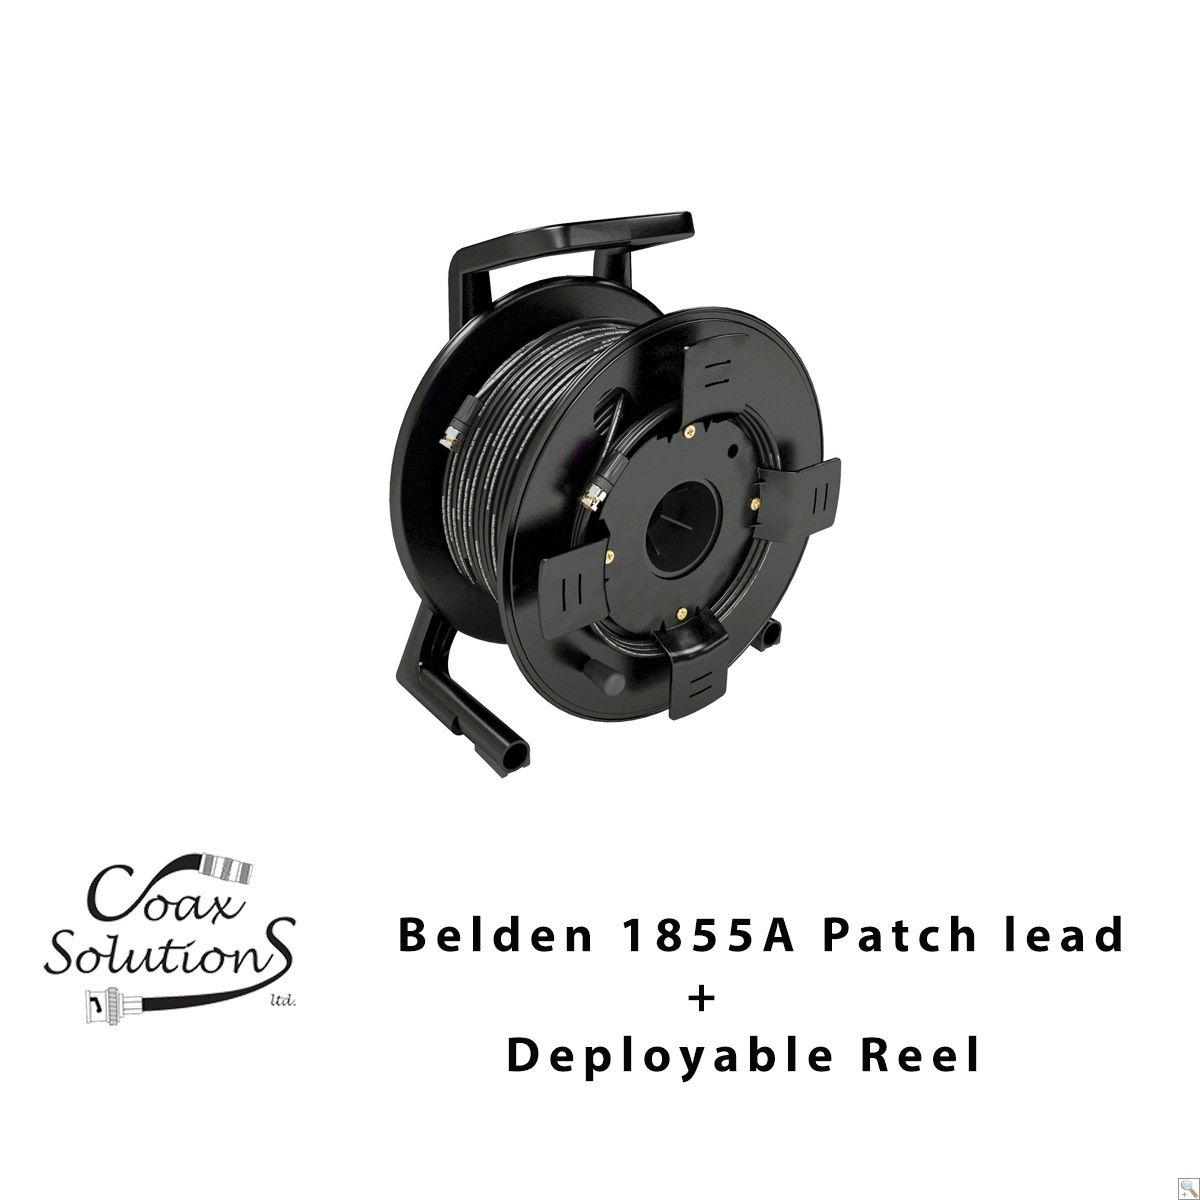 Belden 1855A HD-SDI Patch Cable + Deployable Reel